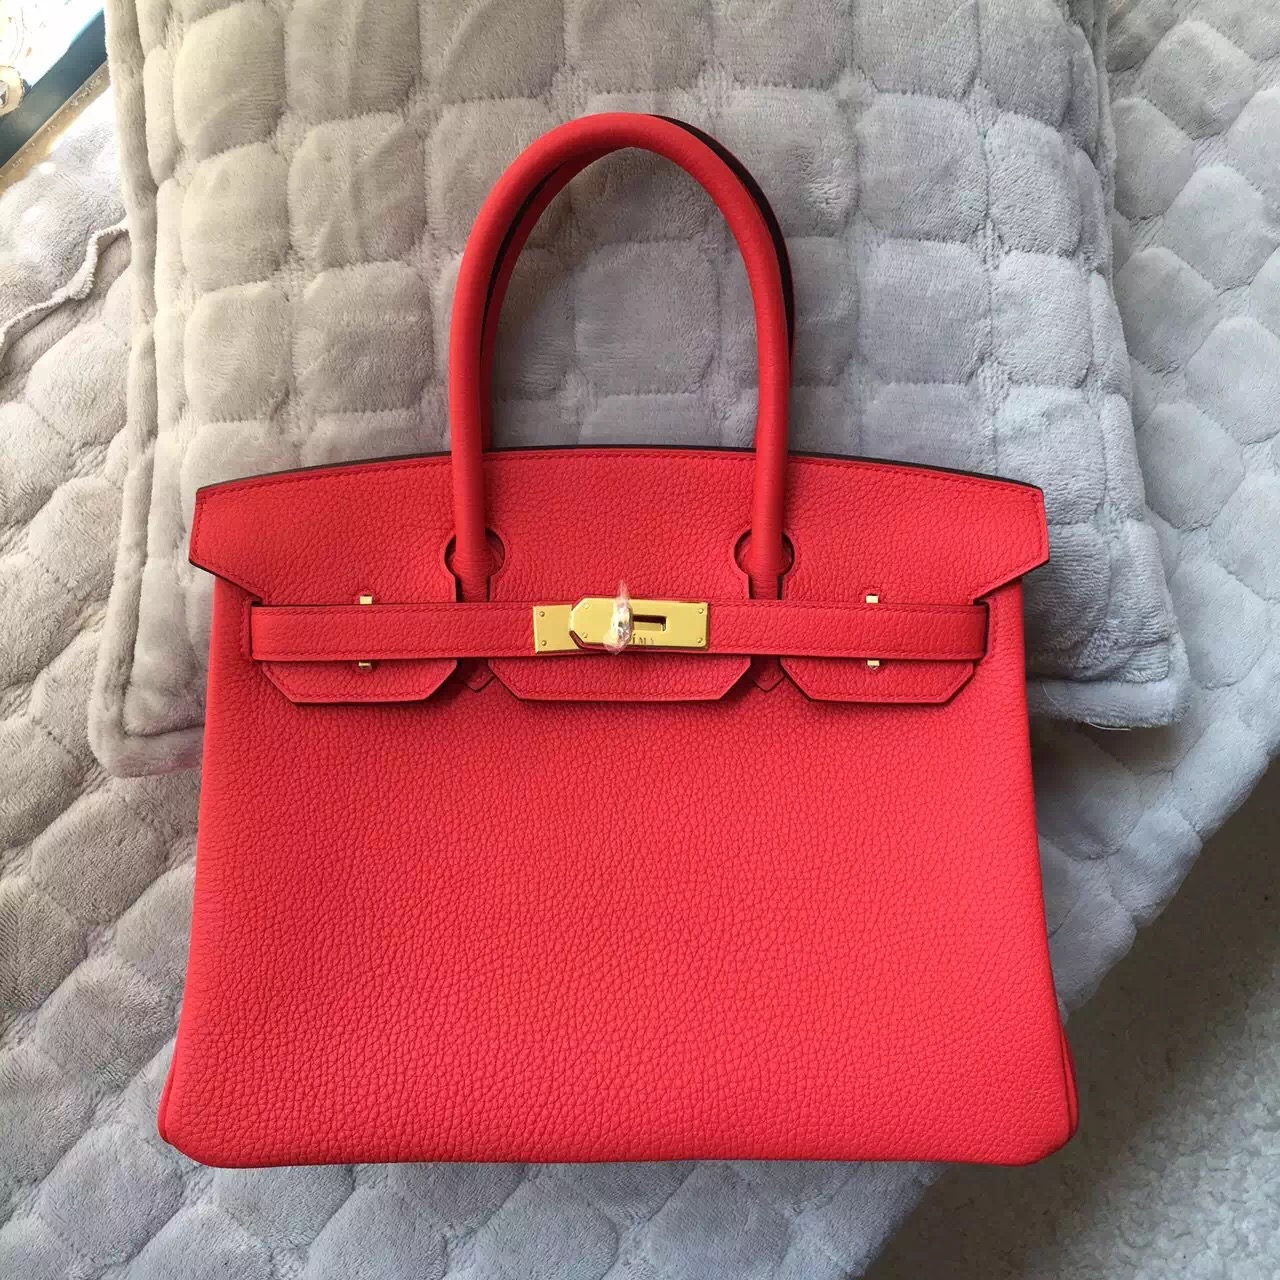 hermes red leather 35 cm birkin bag- red togo with gold hardware, h and m hermes handbags